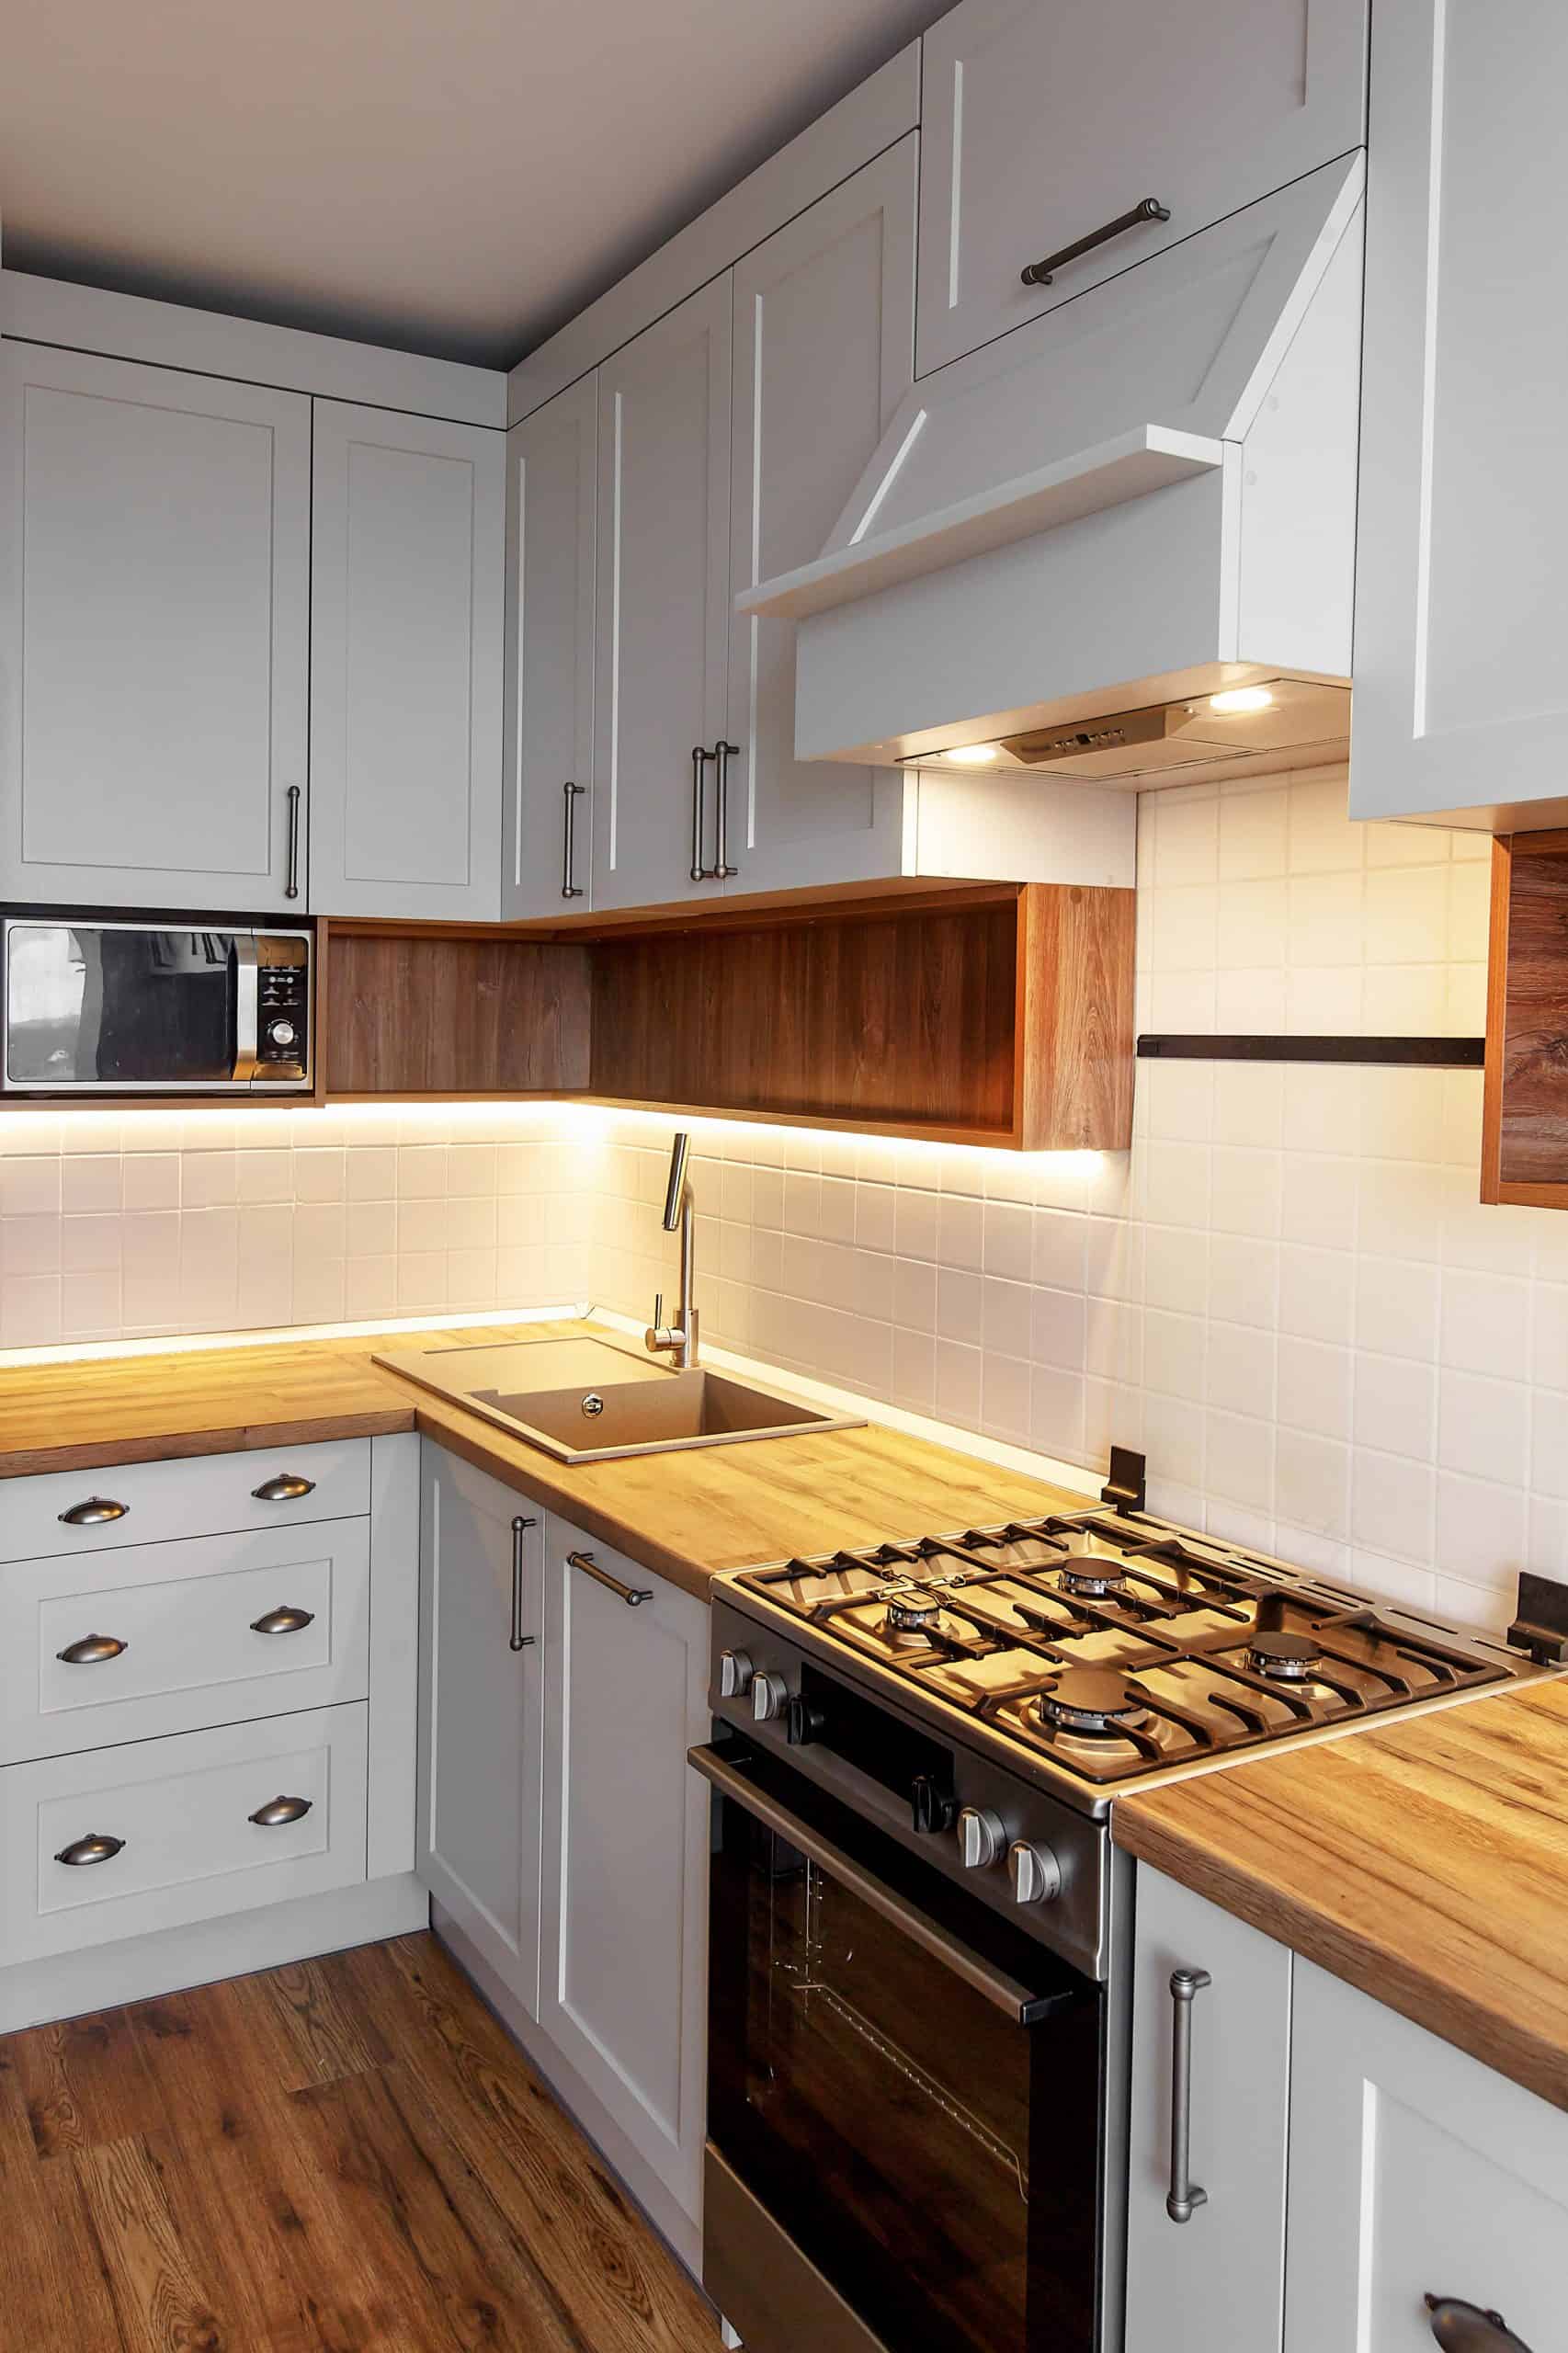 Energy-efficient kitchen under-cabinet lighting provided by PowerMaster Electrics